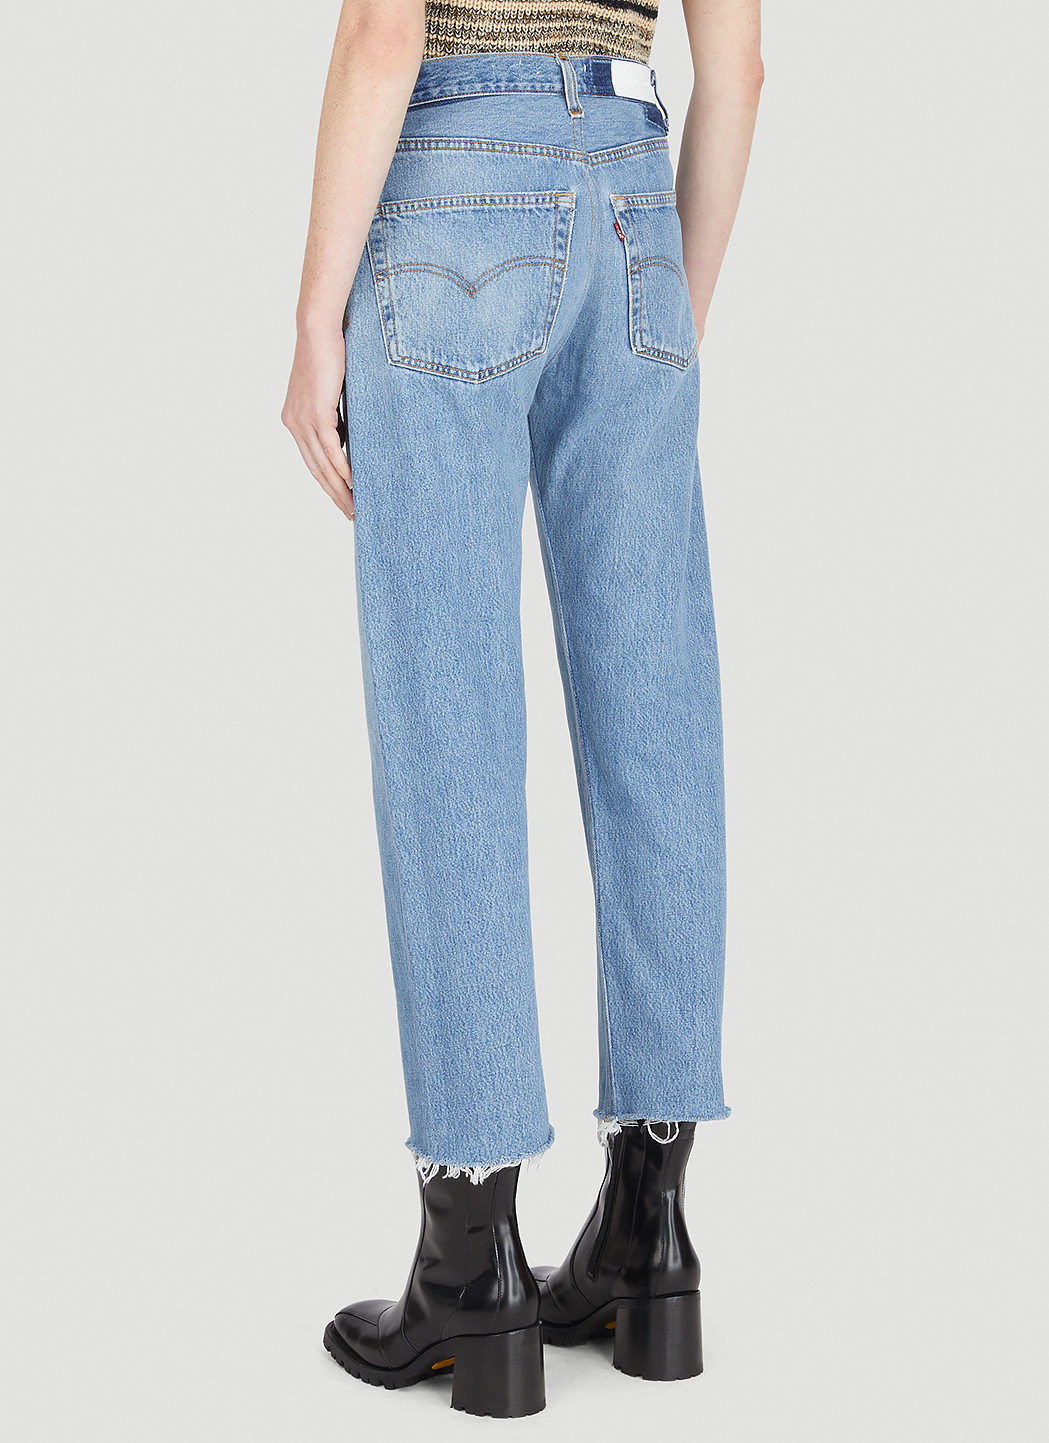 Stove Pipe cropped jeans